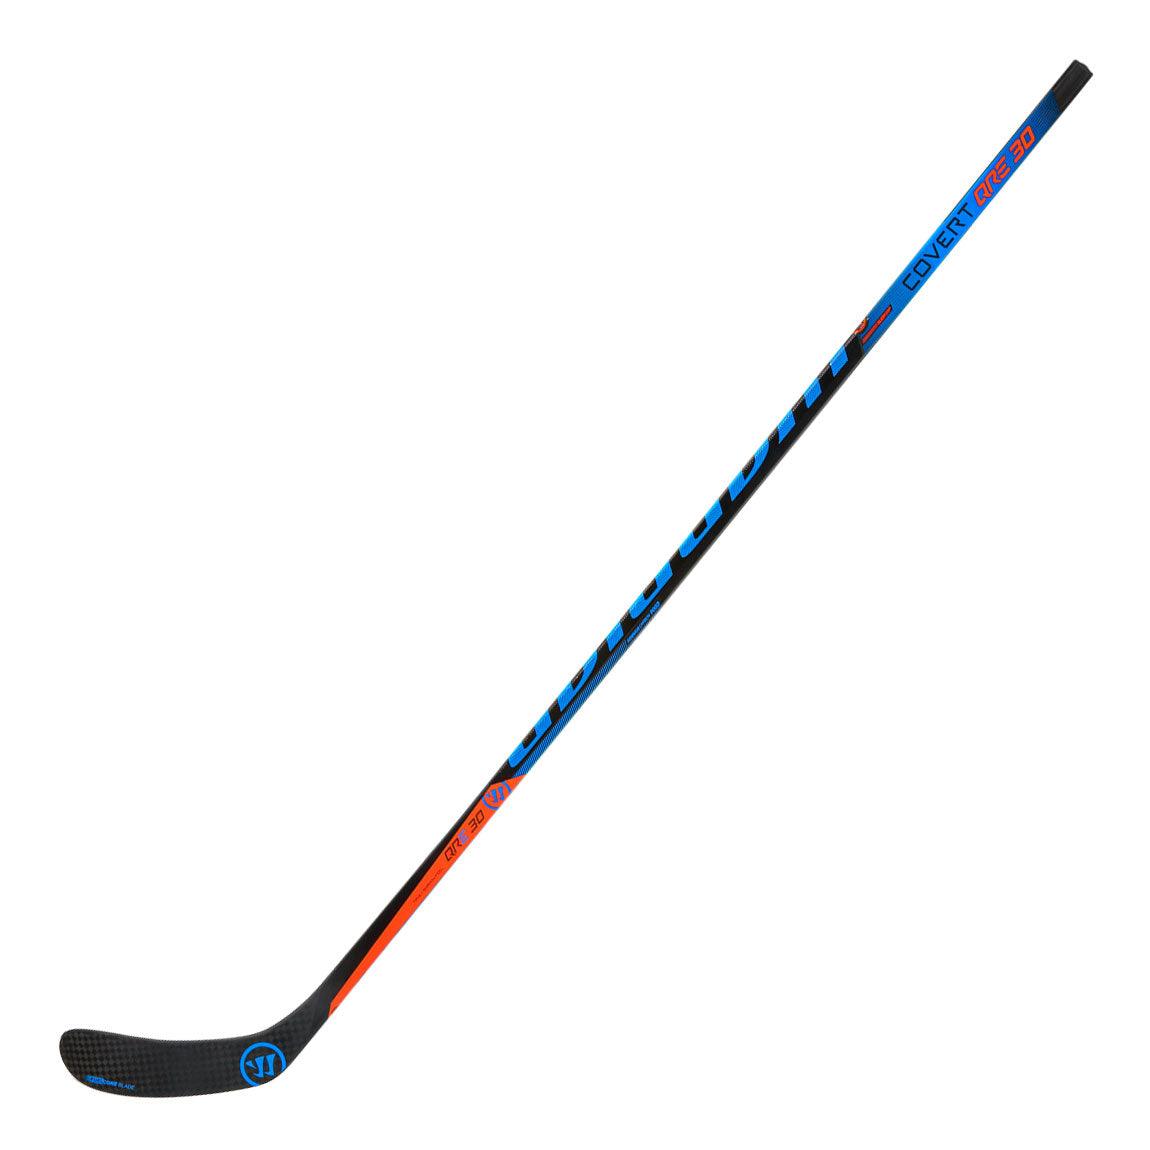 Covert QRE 30 Hockey Stick - Senior - Sports Excellence